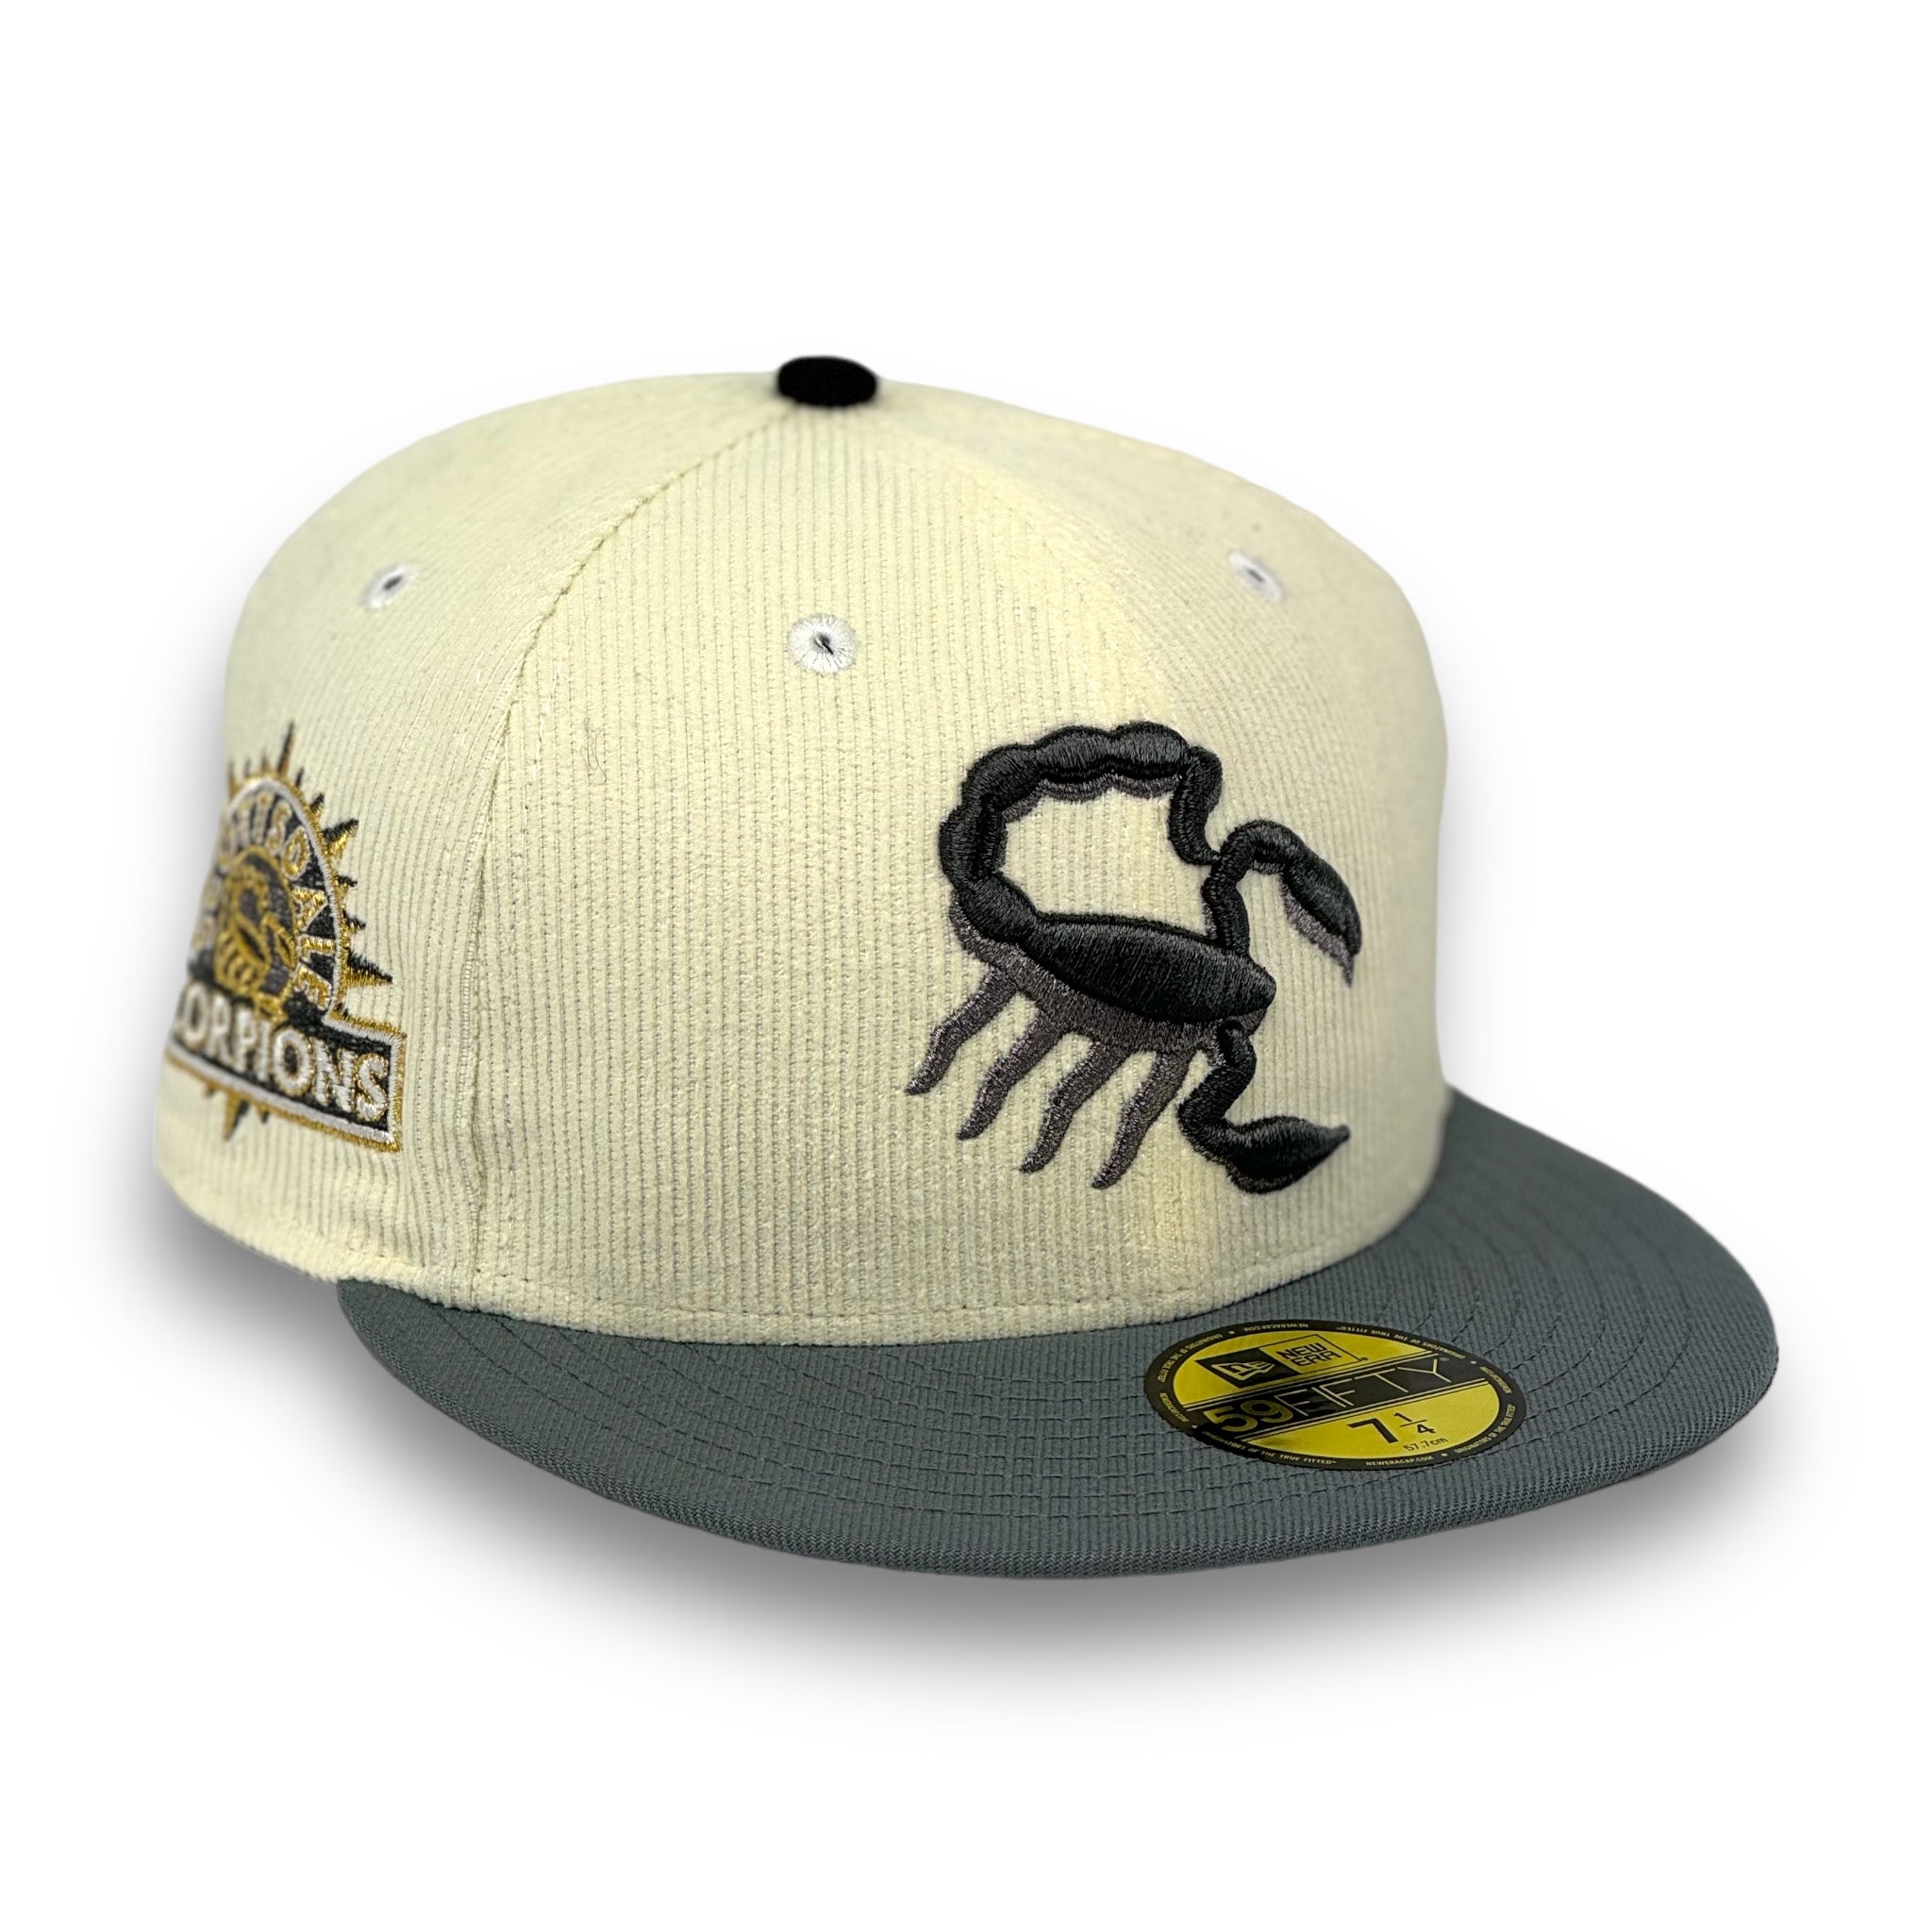 SCOTTSDALE SCORPIONS (CORDUROY) NEW ERA 59FIFTY FITTED